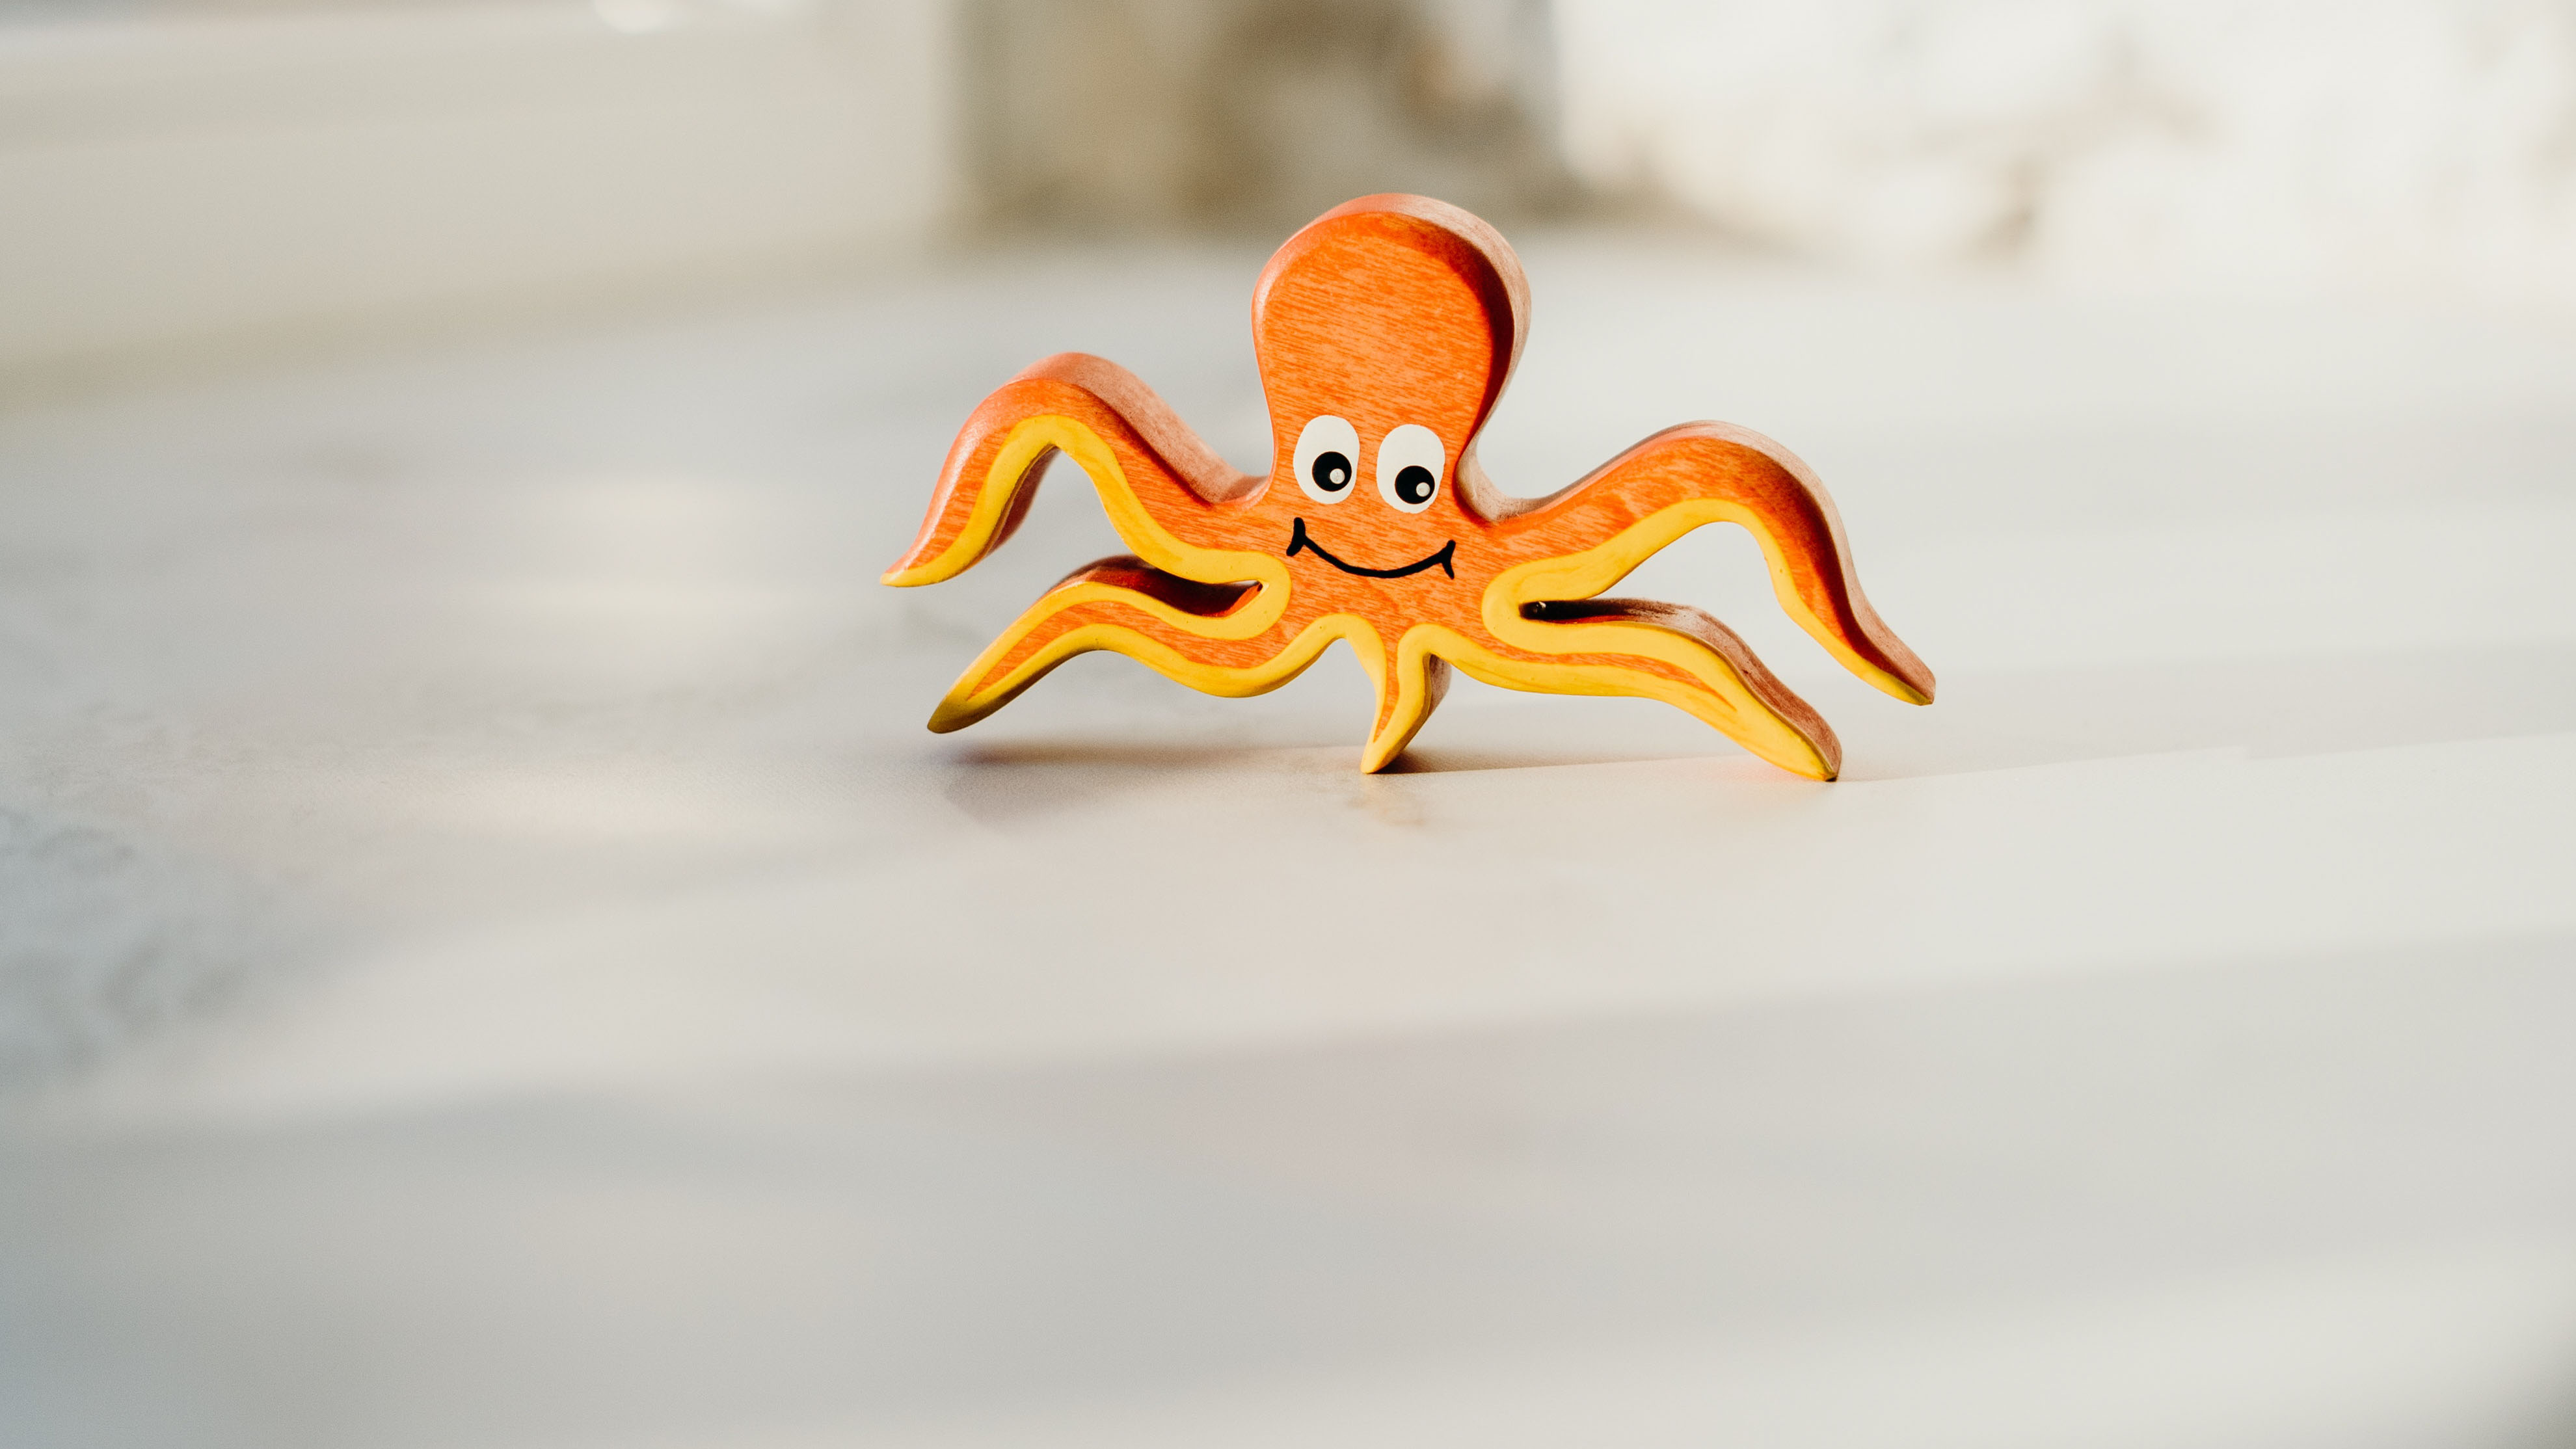 Orange octopus toy with smiling cartoon face.